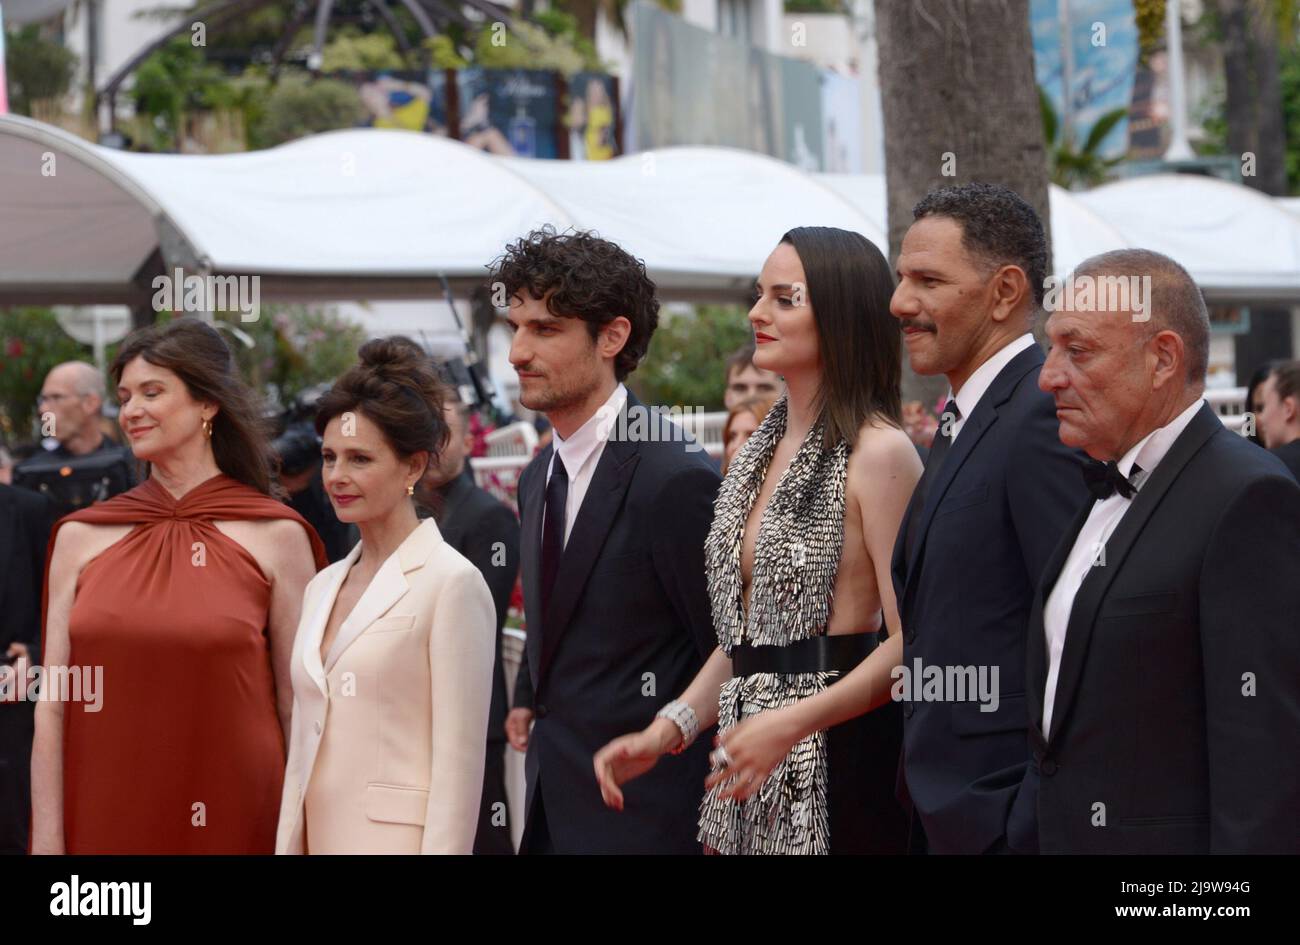 May 24, 2022, CANNES, France: CANNES, FRANCE - MAY 24: (L-R) Producer Anne-Dominique Toussaint, Anouk Grinberg, Director Louis Garrel, Roschdy Zem, NoÃ©mie Merlant and Writer Jean-Claude Pautot attend of the film ''L'Innoncent'' (The Innocent) attend the 75th Anniversary celebration screening of ''The Innocent (L'Innocent)'' during the 75th annual Cannes film festival at Palais des Festivals on May 24, 2022 in Cannes, France. (Credit Image: © Frederick Injimbert/ZUMA Press Wire) Stock Photo